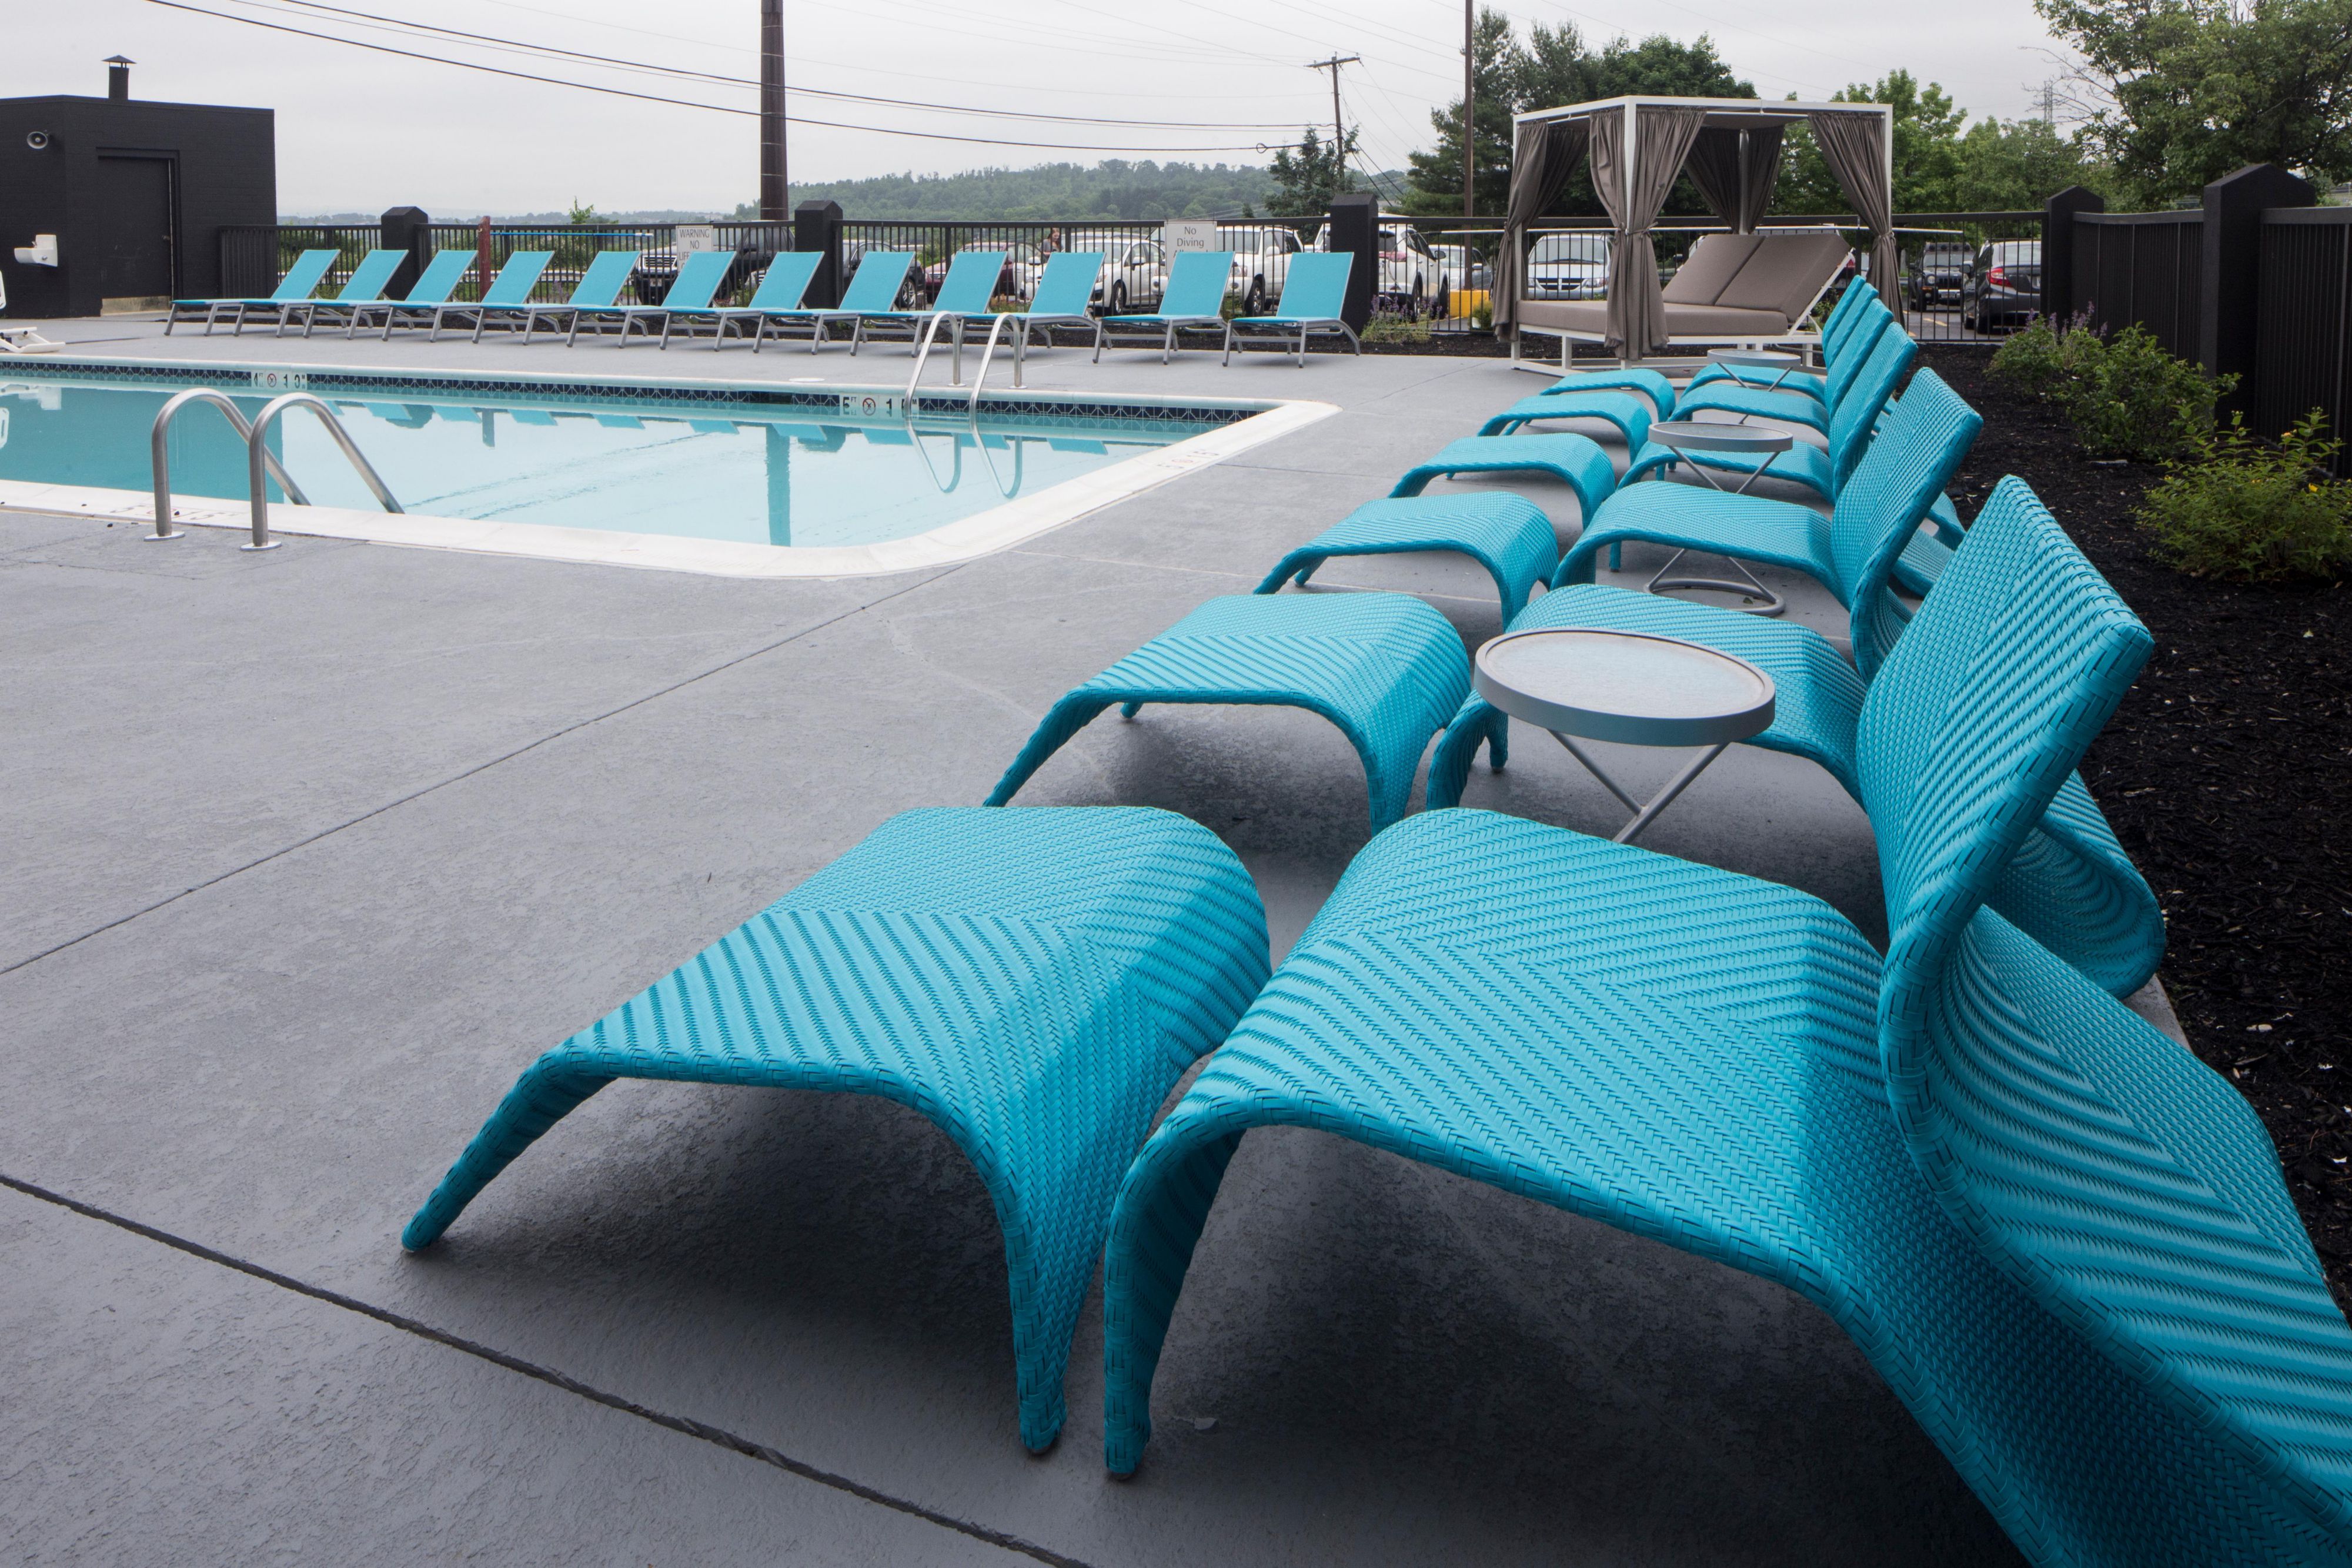 Whether you like to lounge poolside or make a splash, our seasonal outdoor pool area is the perfect place to unwind. Sink into comfortable lounges and bask in the sun. Enjoy beverage service from 4:30 PM to 10:00 PM while you socialize in the warm glow of our fire pits. Pool hours are 9:00 AM - 10:00 PM.